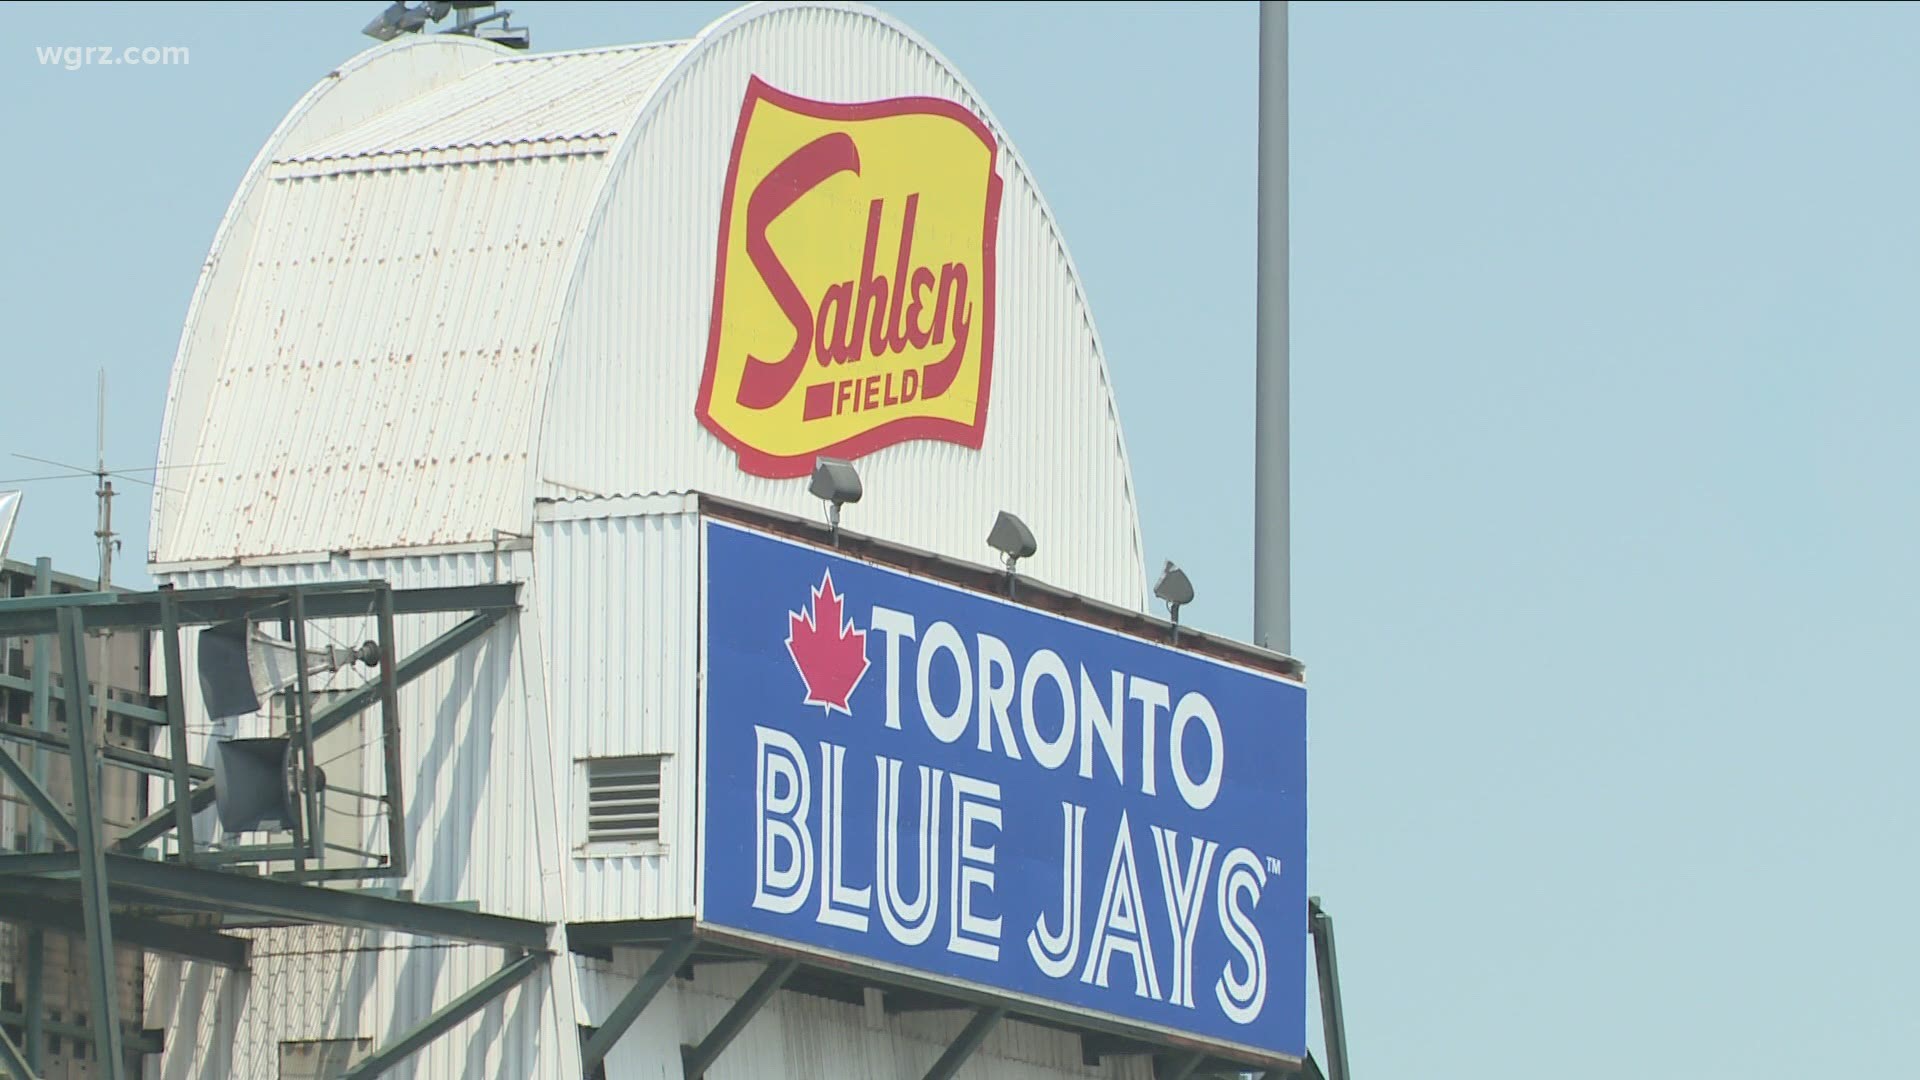 The Blue Jays released a statement earlier today after receiving support from their city and the province of Ontario.